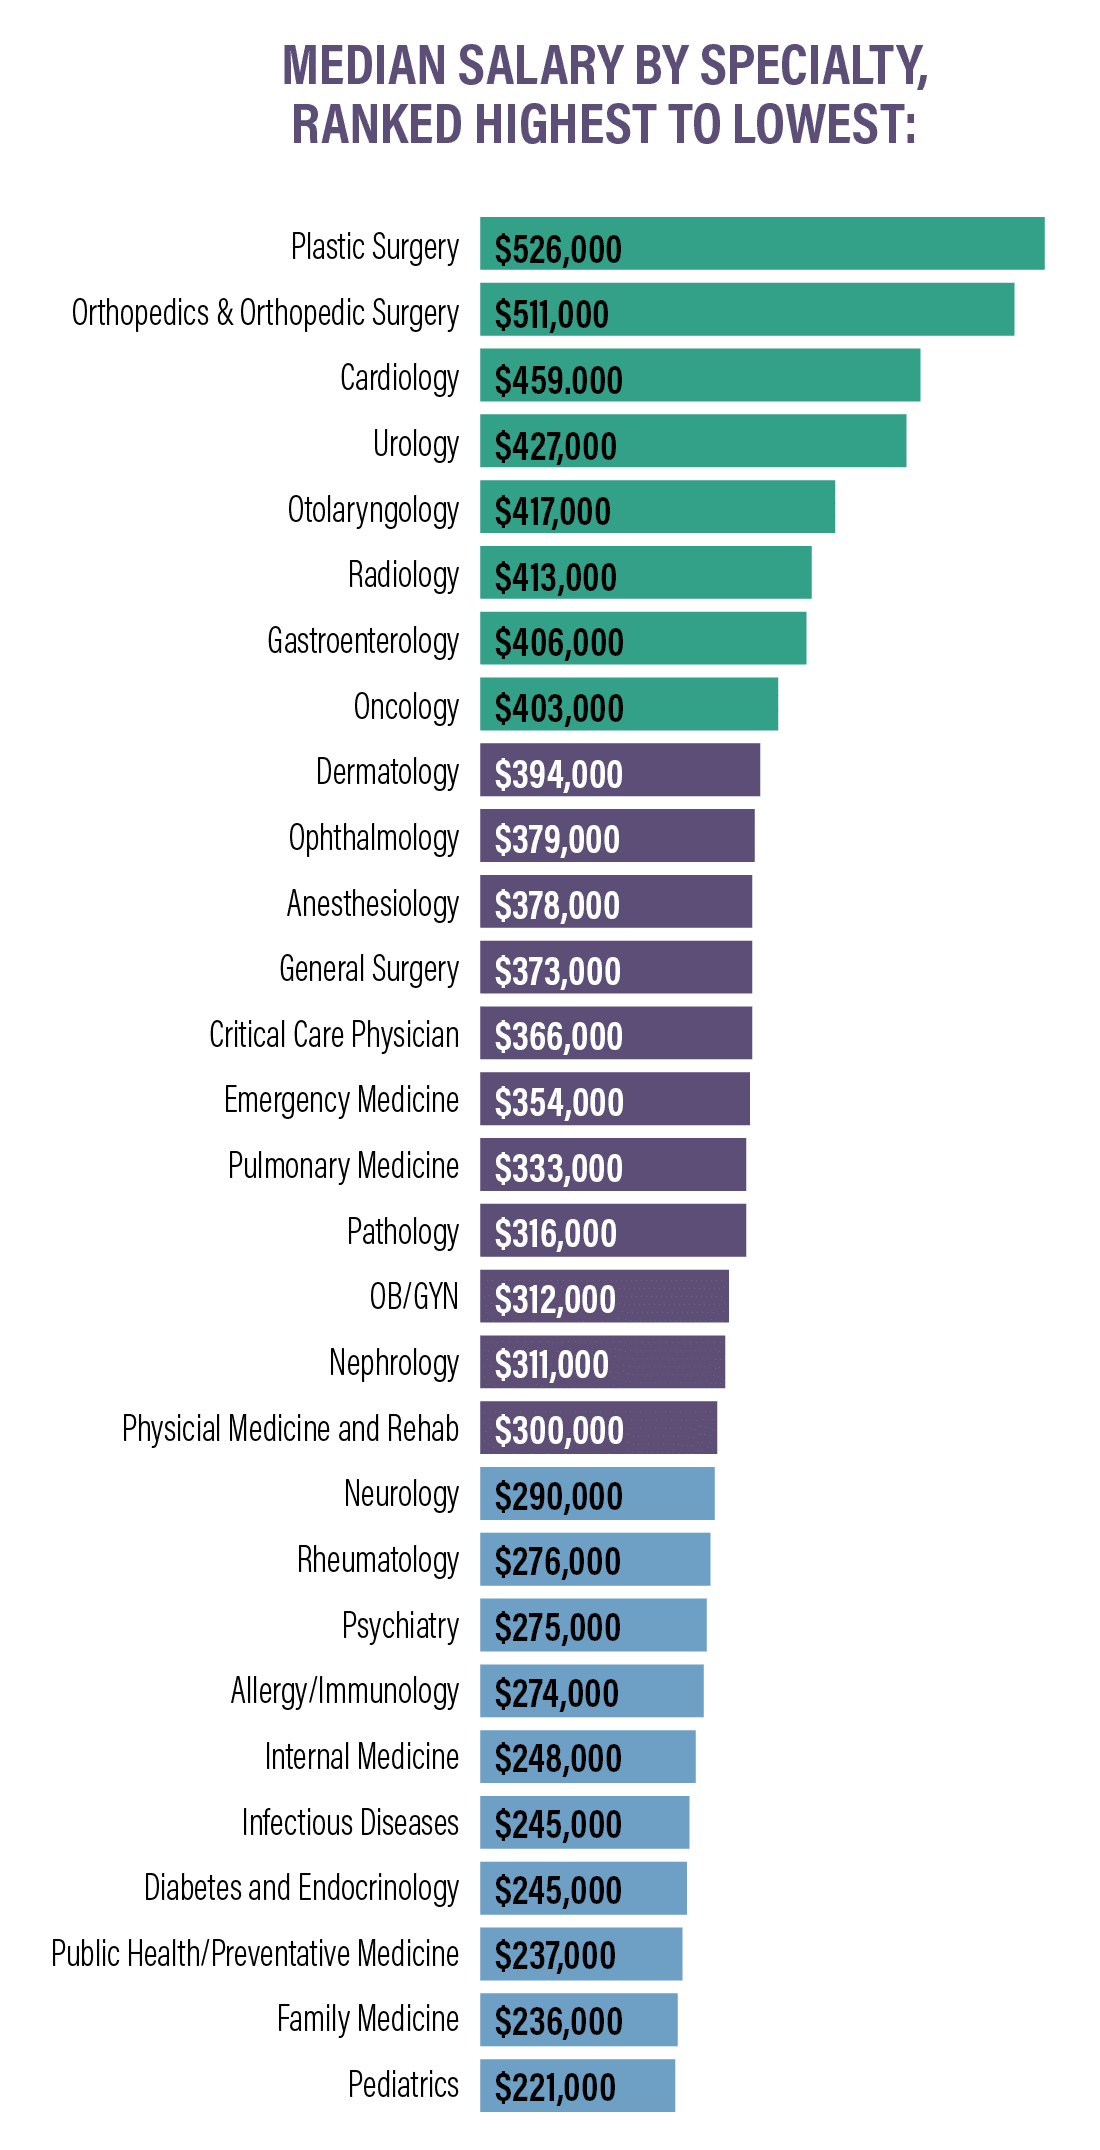 Median salary by physician specialty